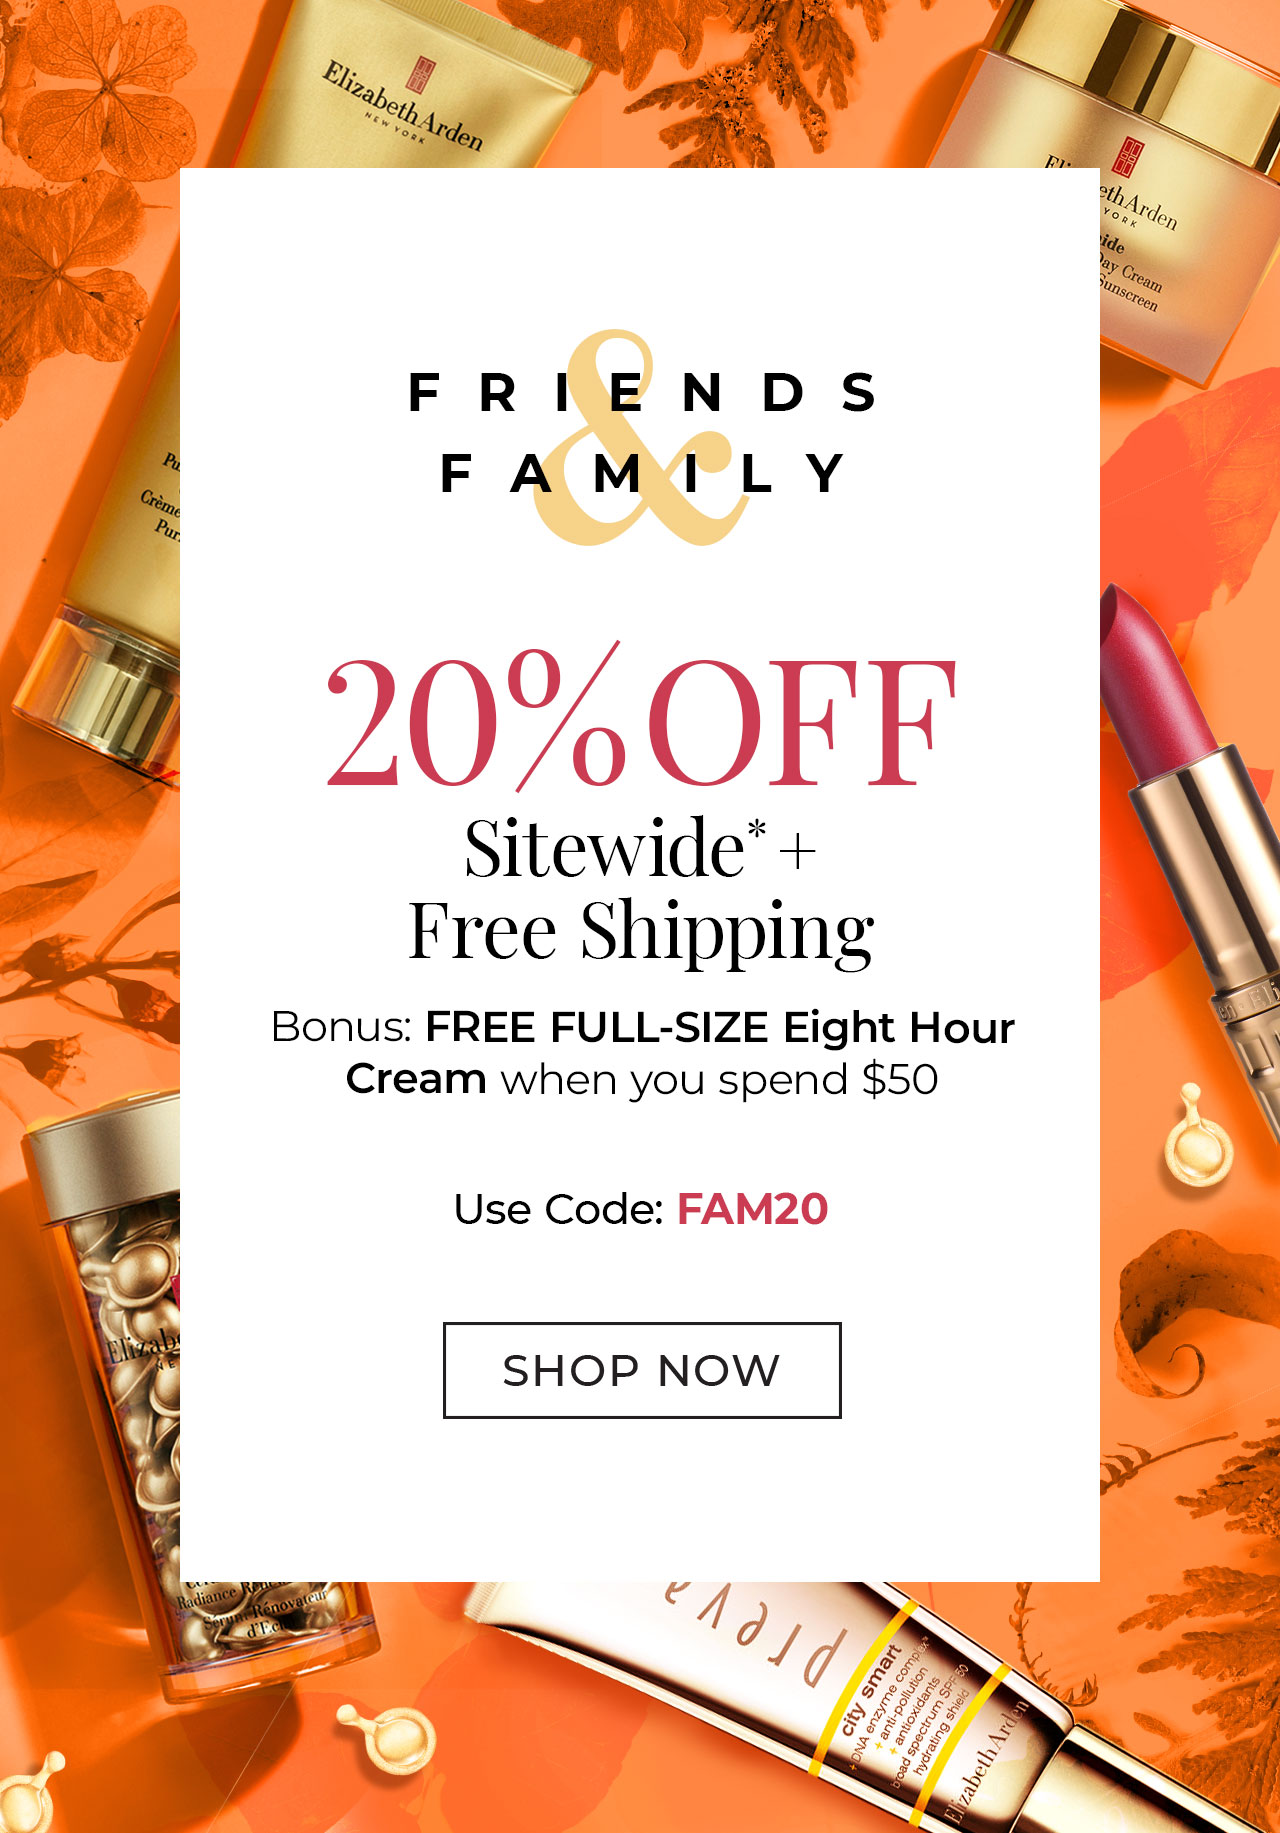 Friends & Family | 20% off sitewide* + free shipping | Bonus: FREE FULL-SIZE Eight Hour Cream when you spend $50 | Use Code: FAM20 | Shop Now